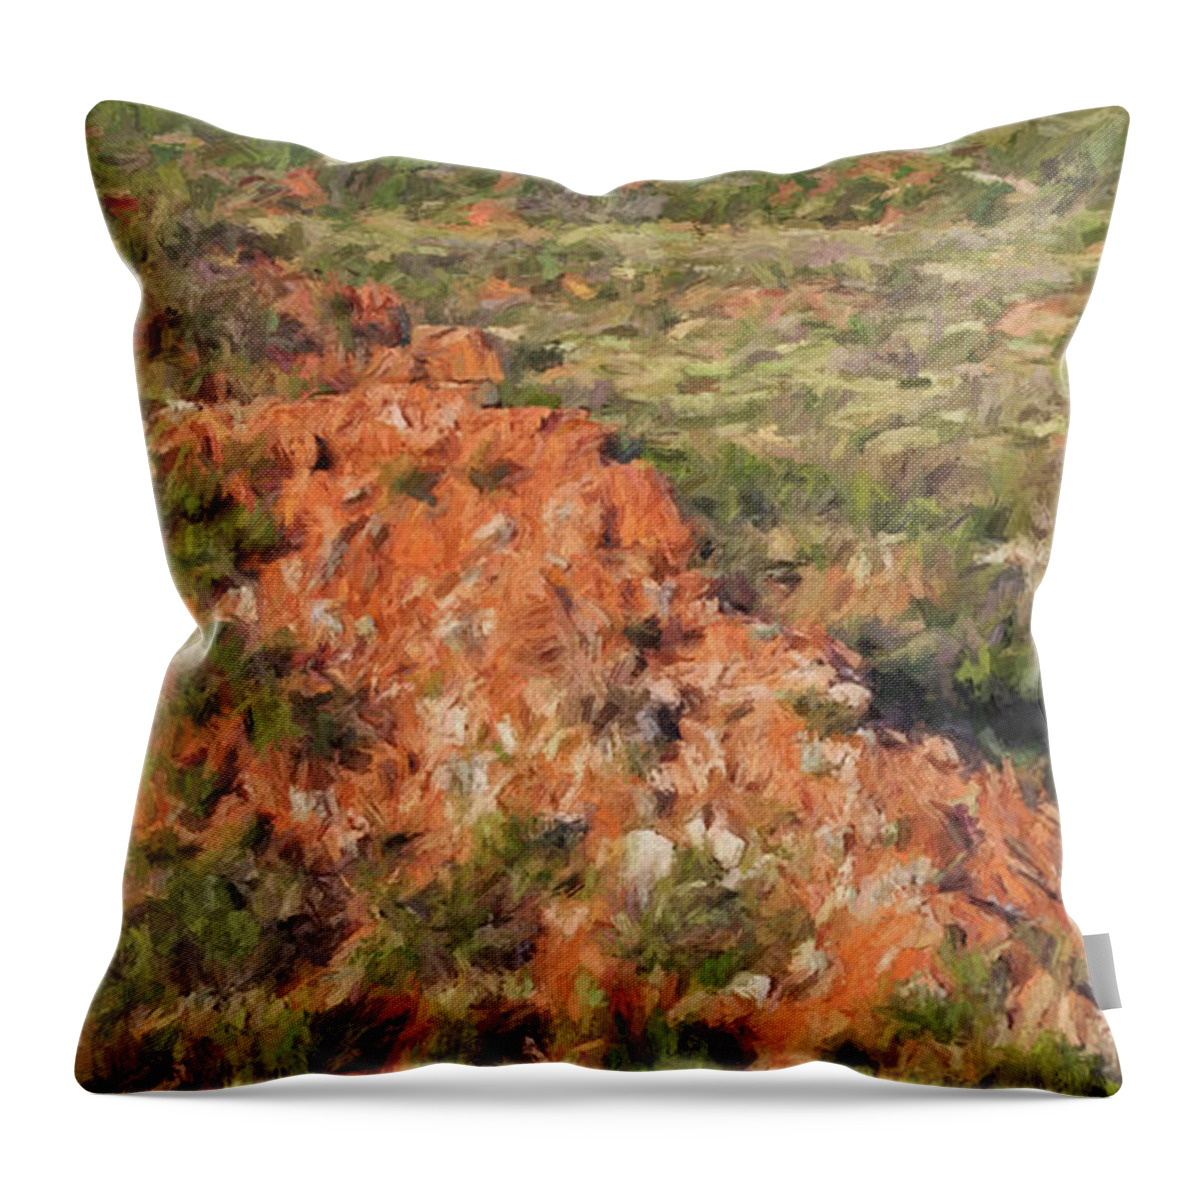 Texas Throw Pillow featuring the painting Rugged Patch Nbr 01A by Will Barger